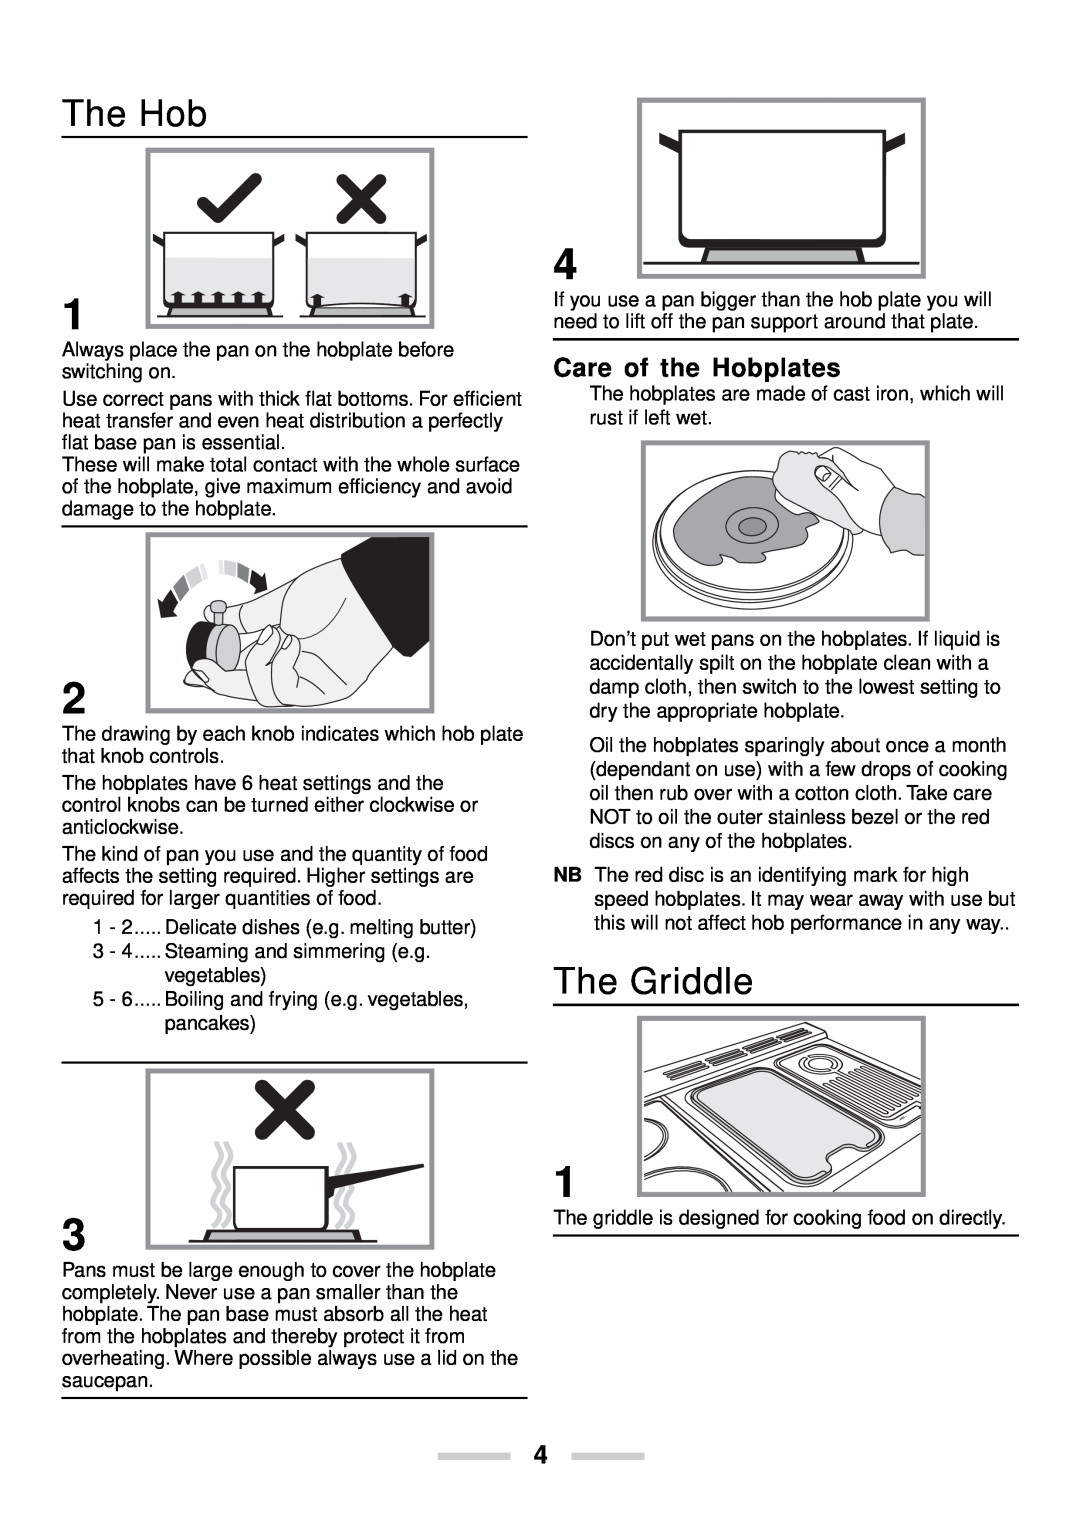 Rangemaster U102210-04 manual The Hob, The Griddle, Care of the Hobplates 